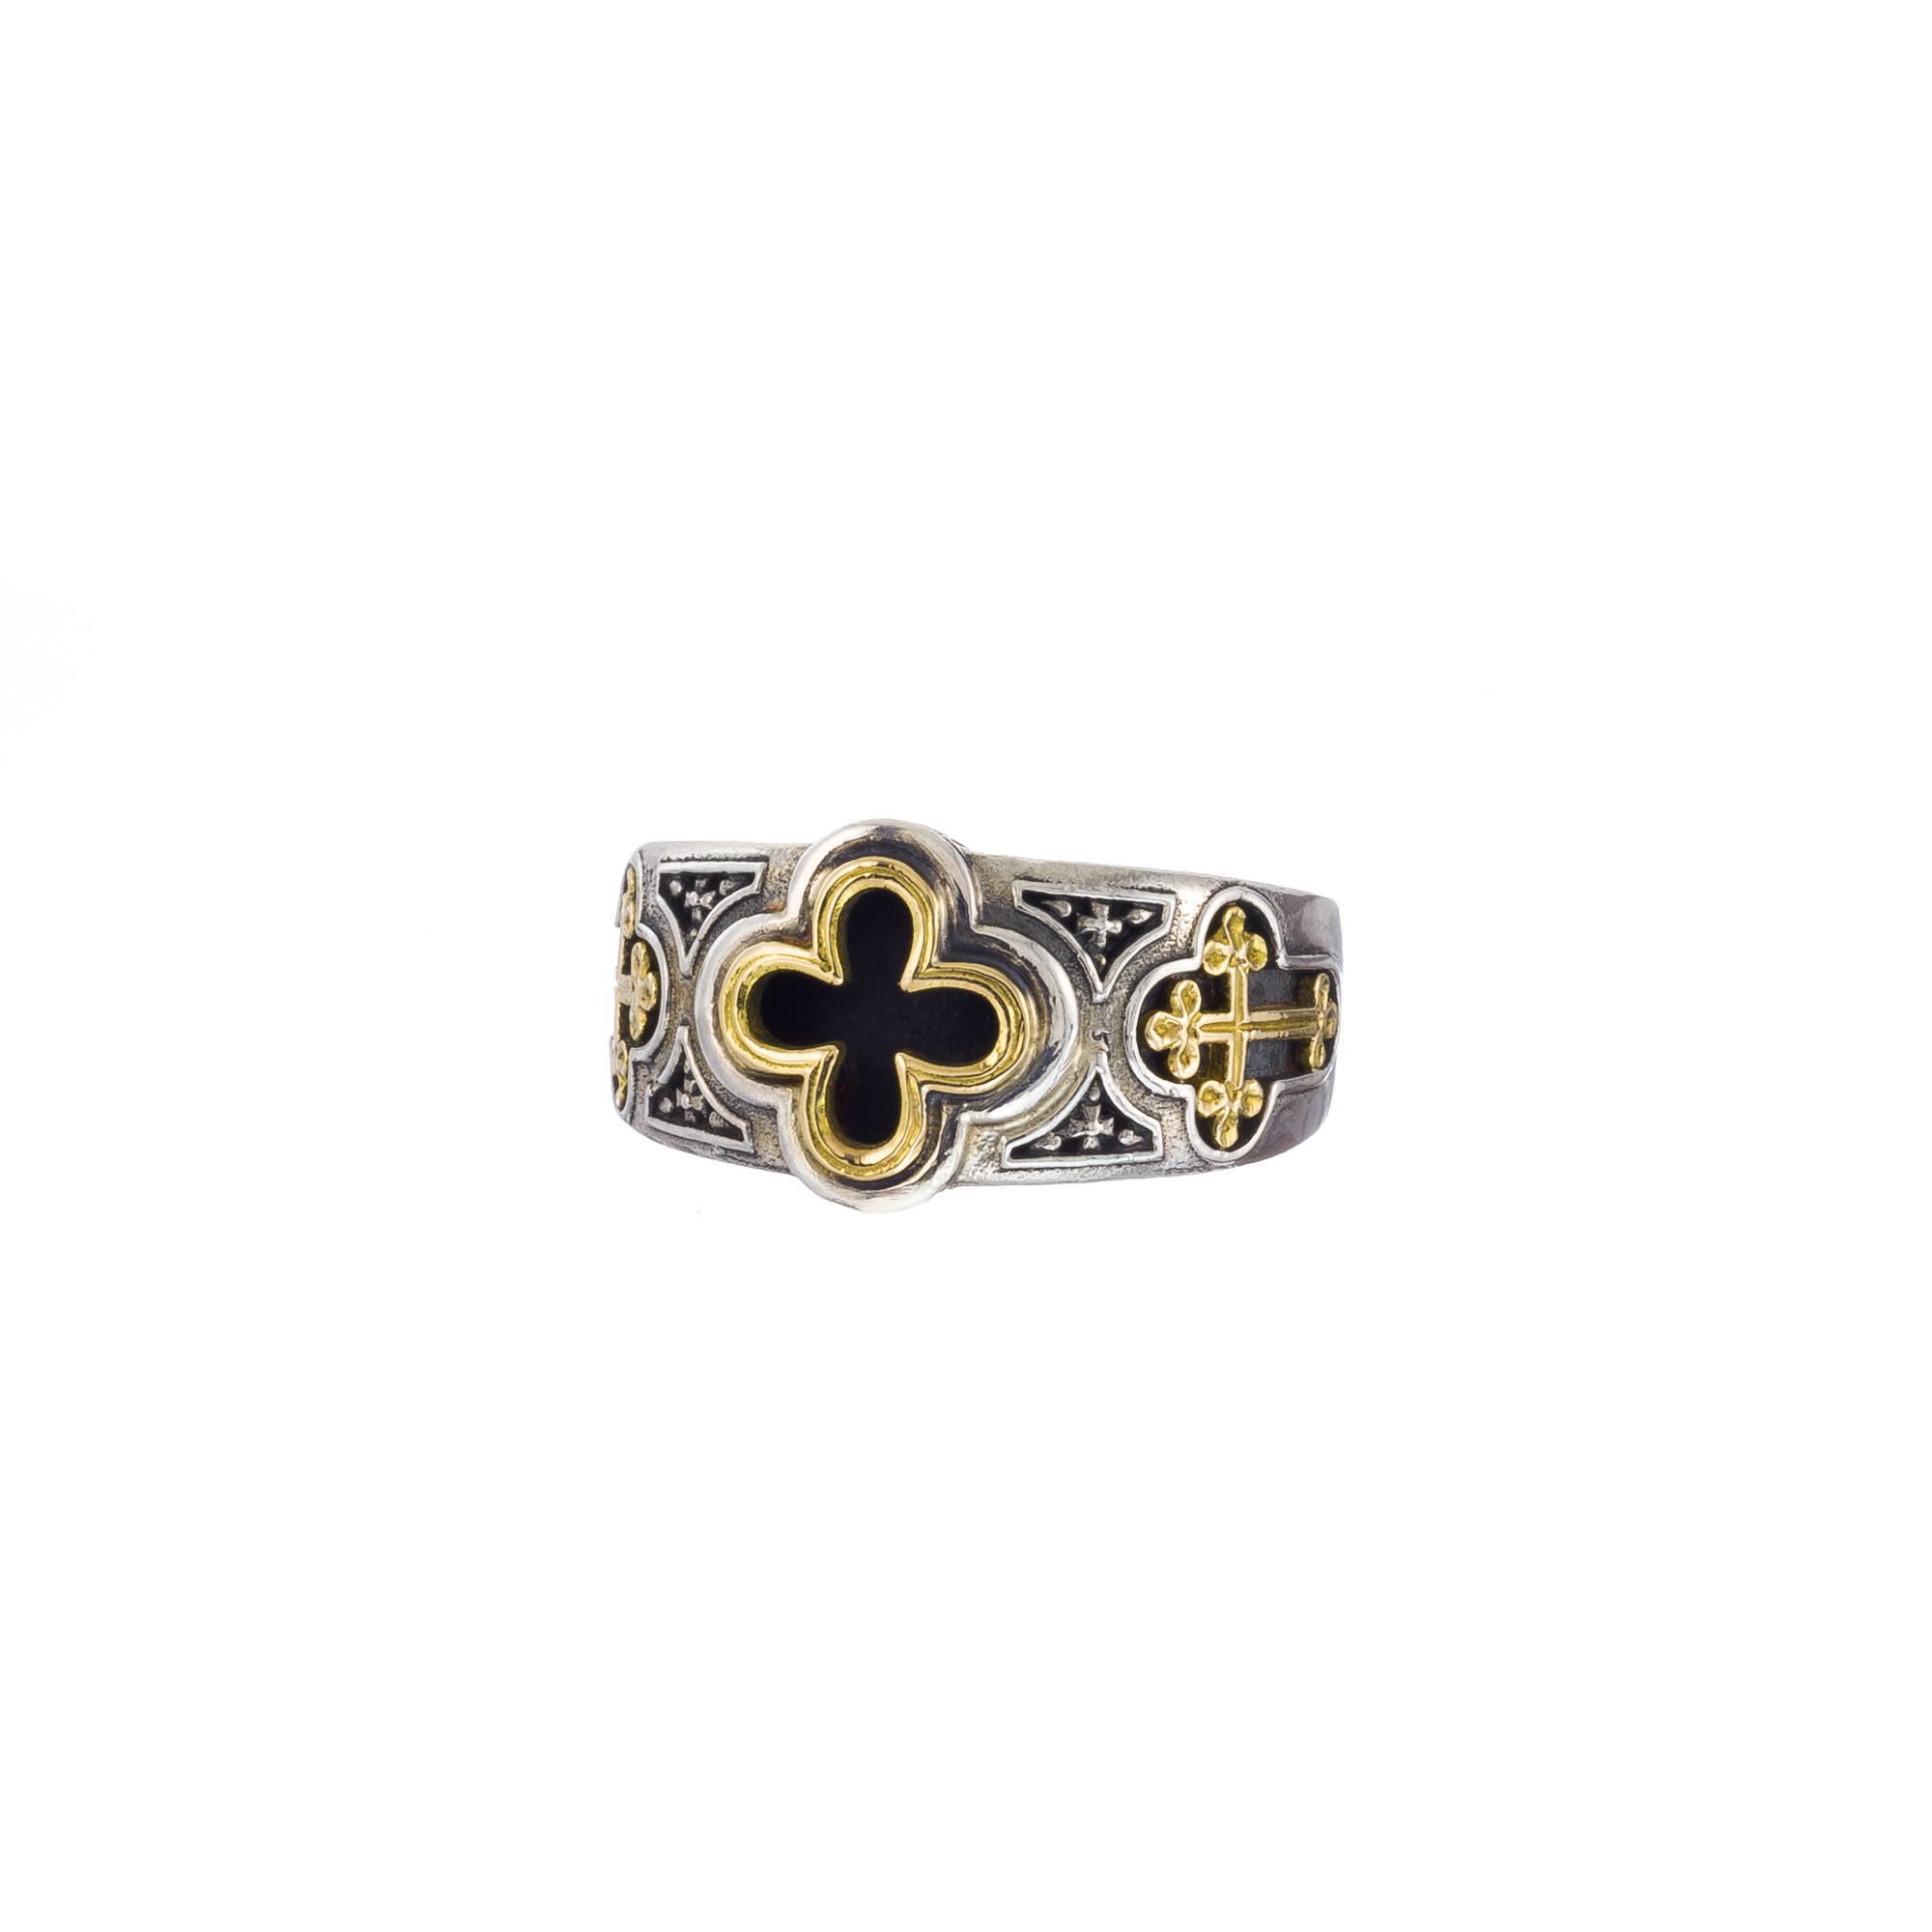 Odysseus Ring in 18K Gold and Sterling Silver 2974-b